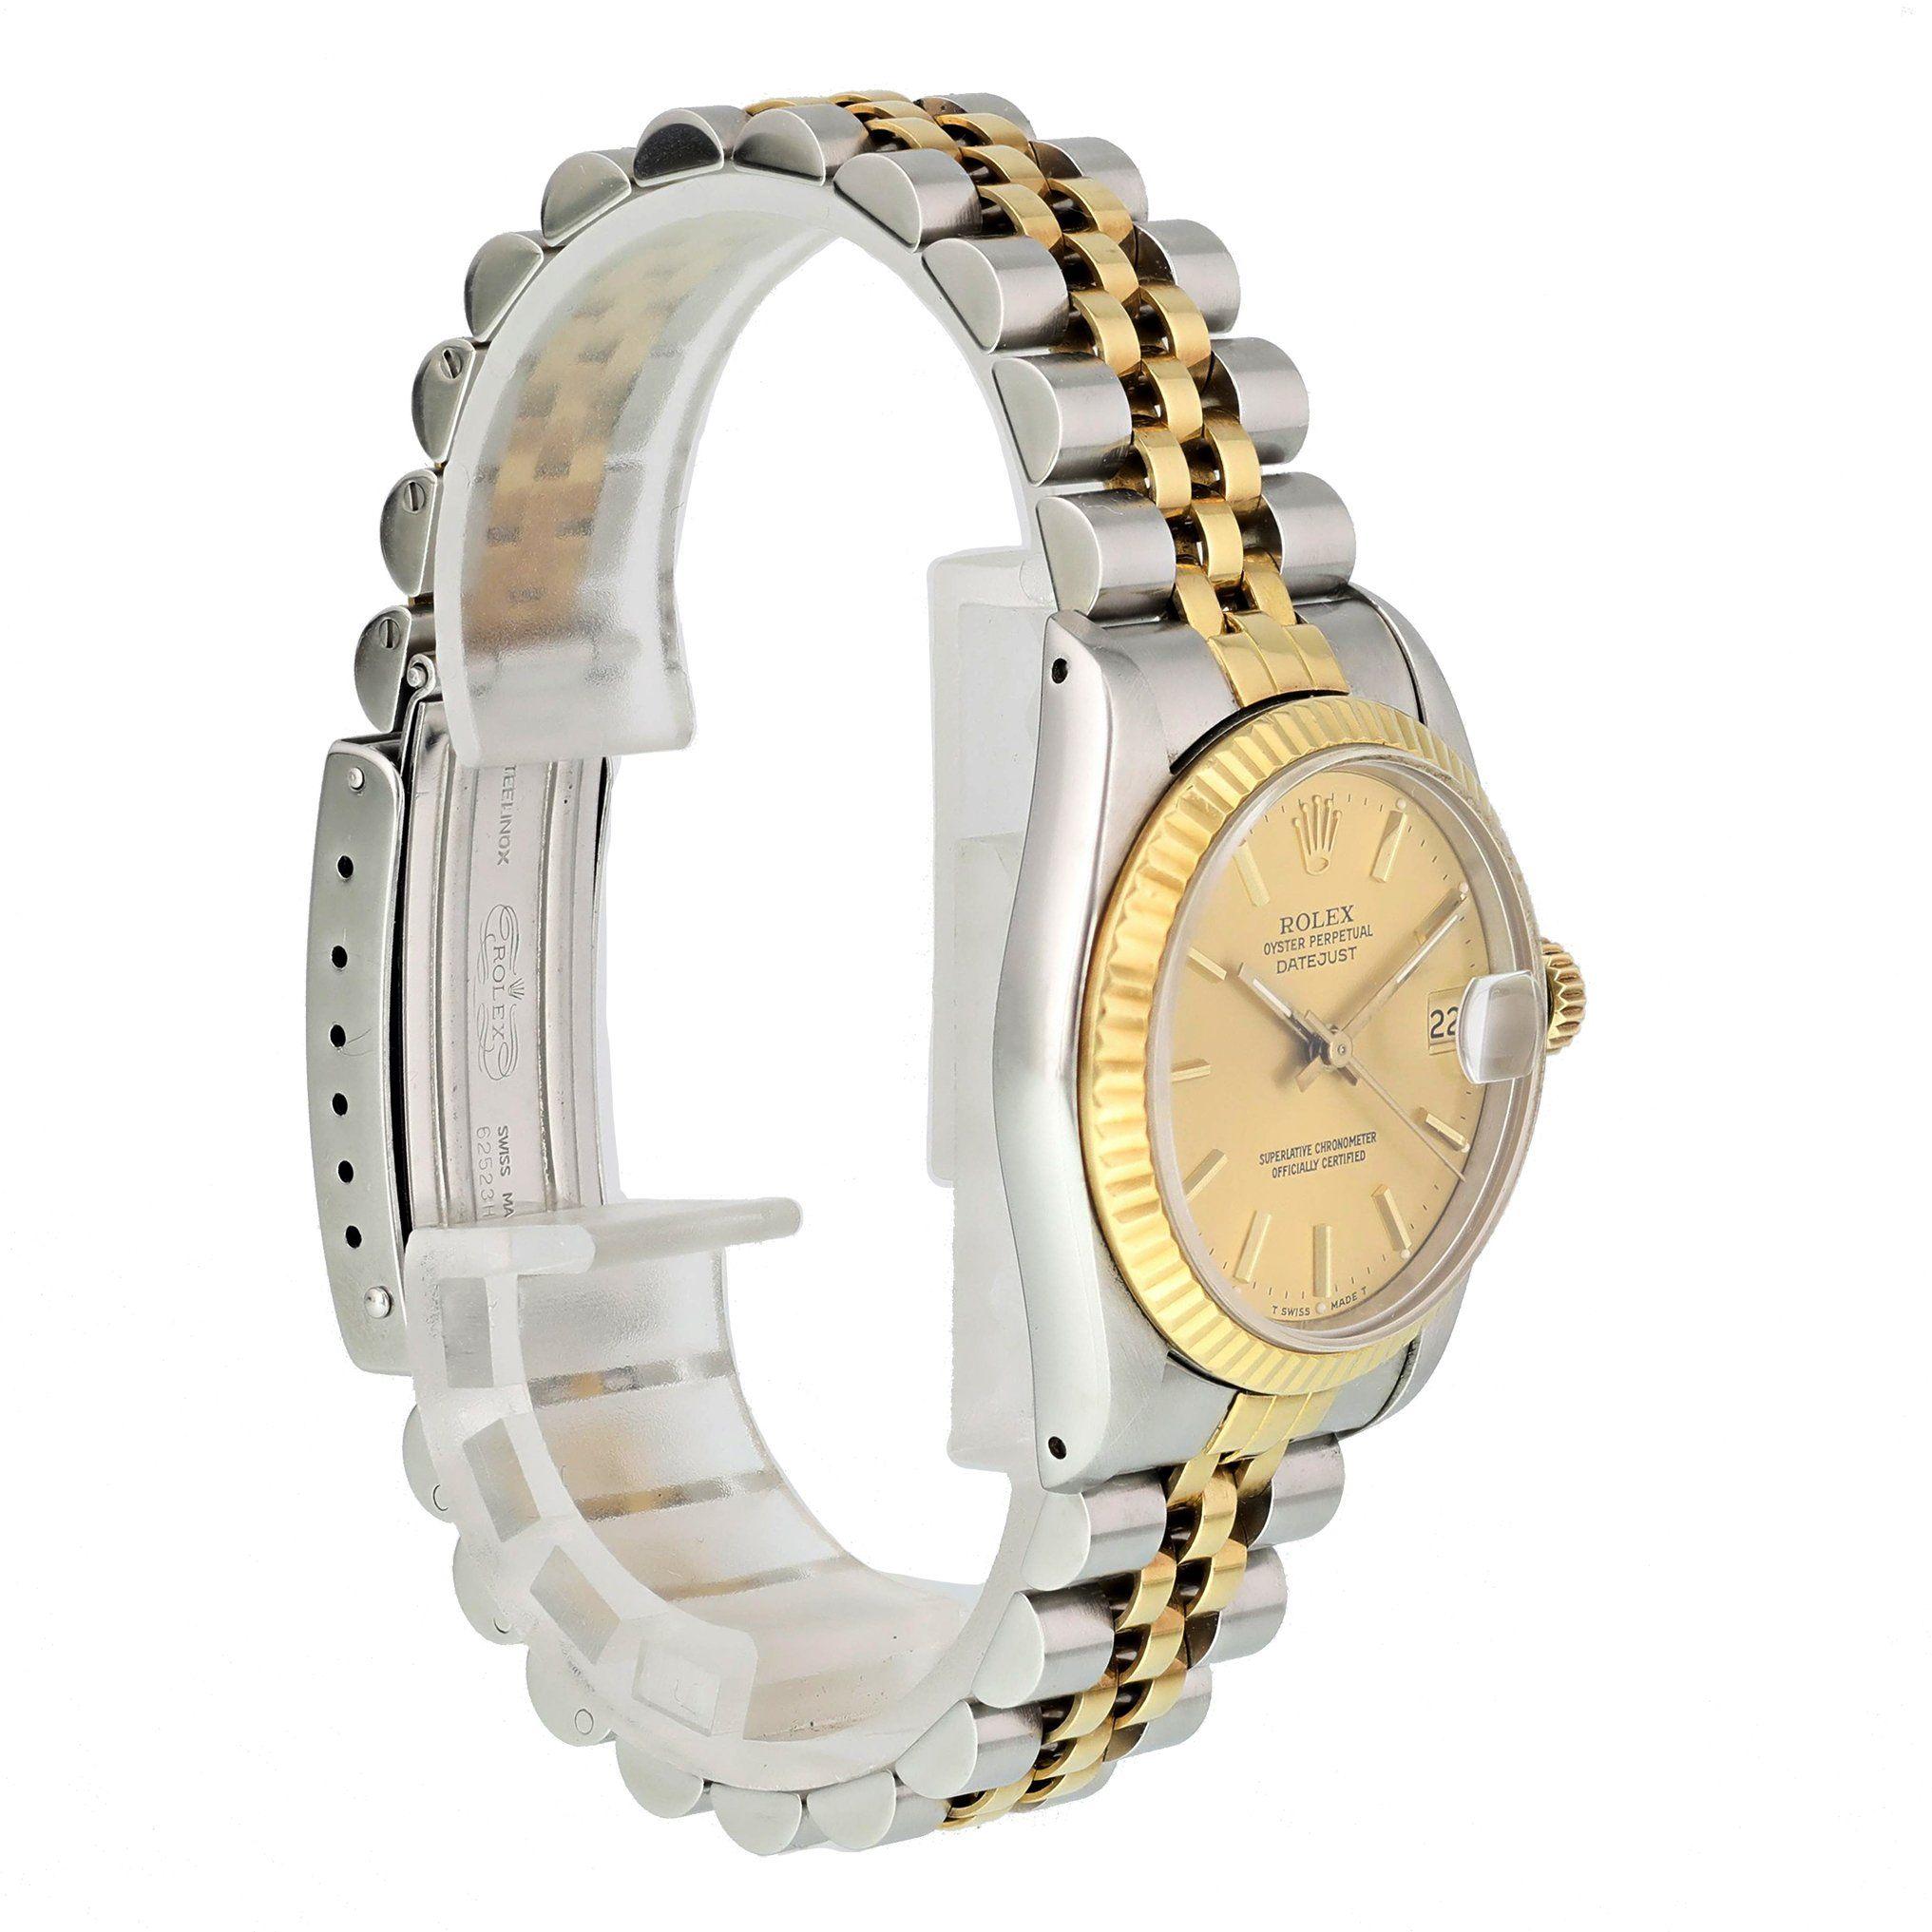 Rolex Datejust 68273 Midsize Ladies Watch In Excellent Condition For Sale In New York, NY